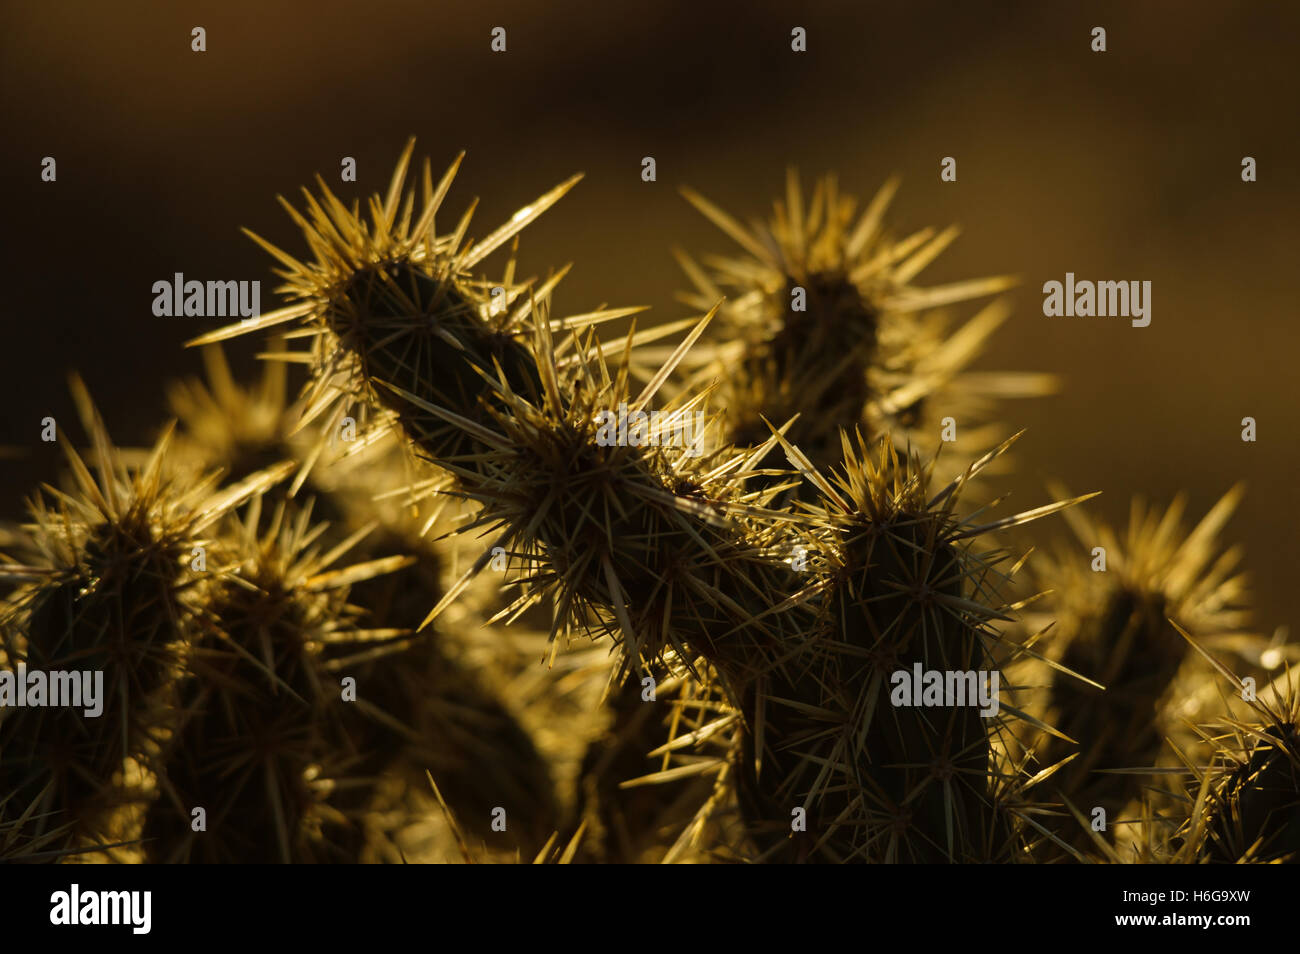 backlit cholla cactus spine detail with dark background Stock Photo